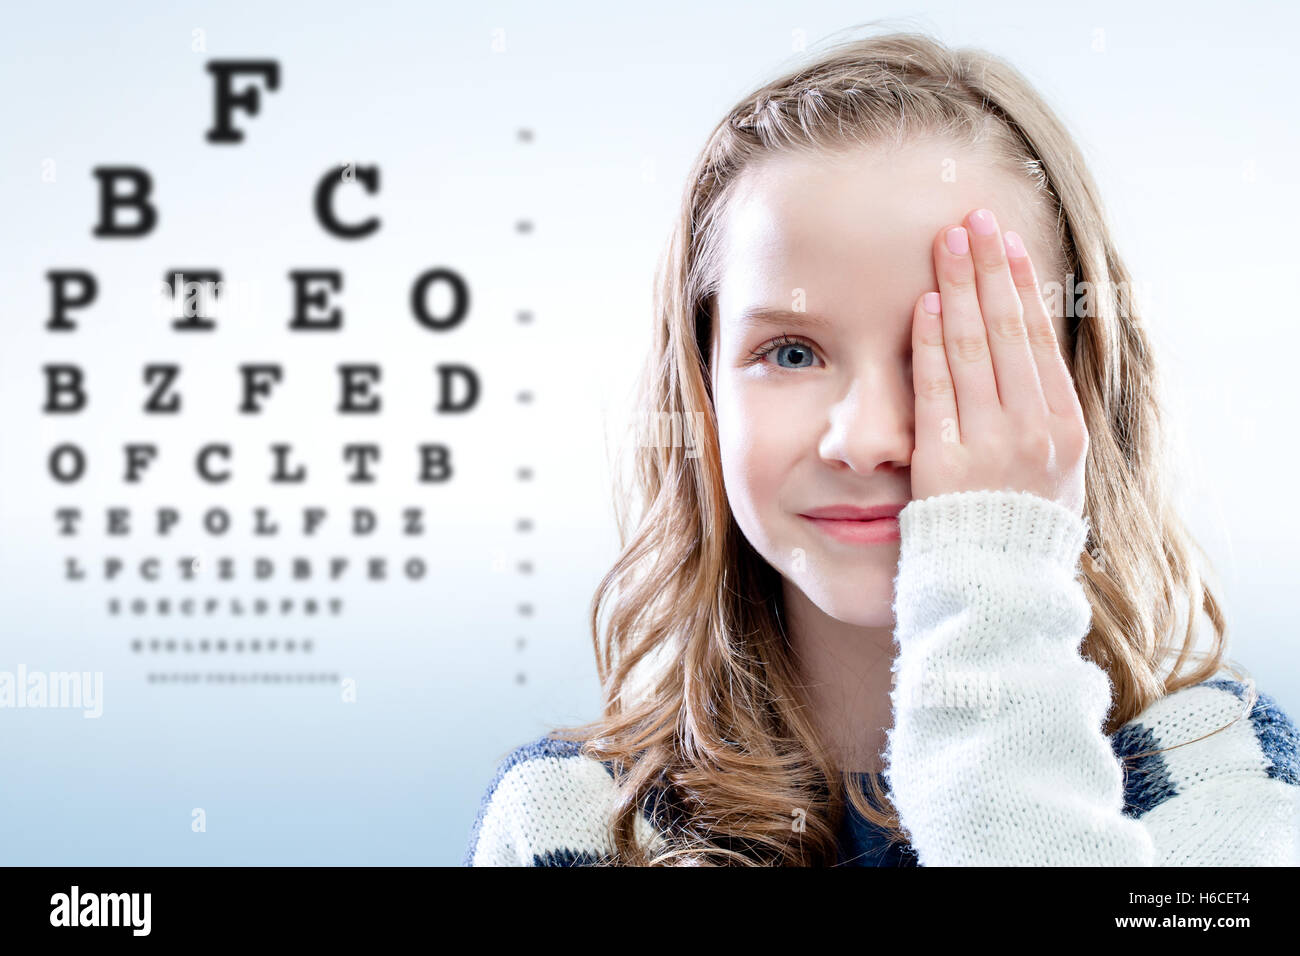 Close up portrait of girl reviewing eyesight closing eye with hand.Out of focus test chart in background. Stock Photo